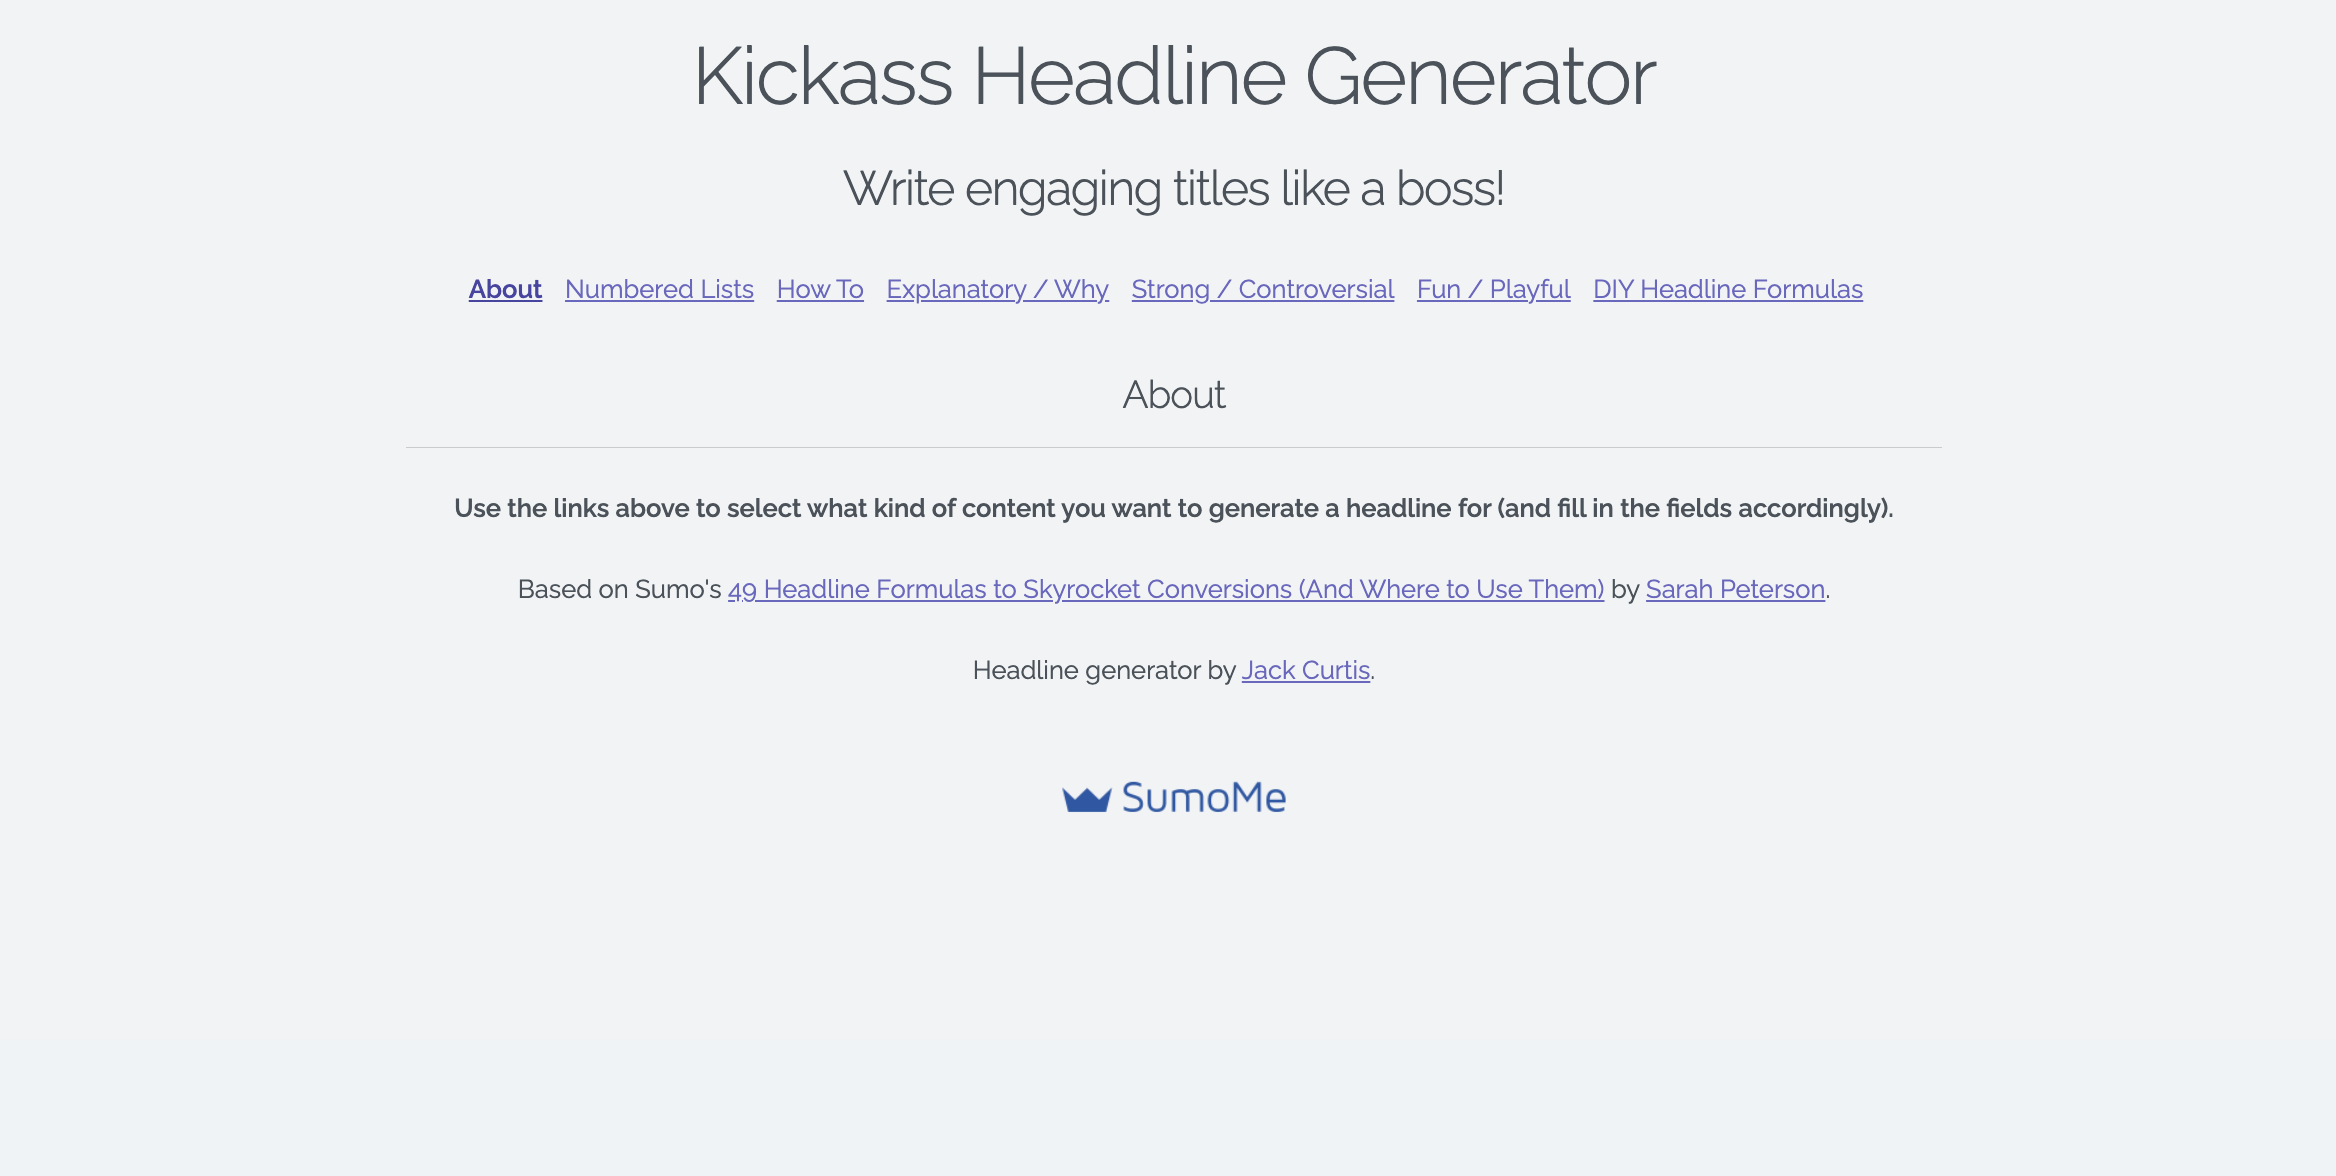 sumome 1 541 - 16 Free Title Generator Tools For Writing Better Headlines